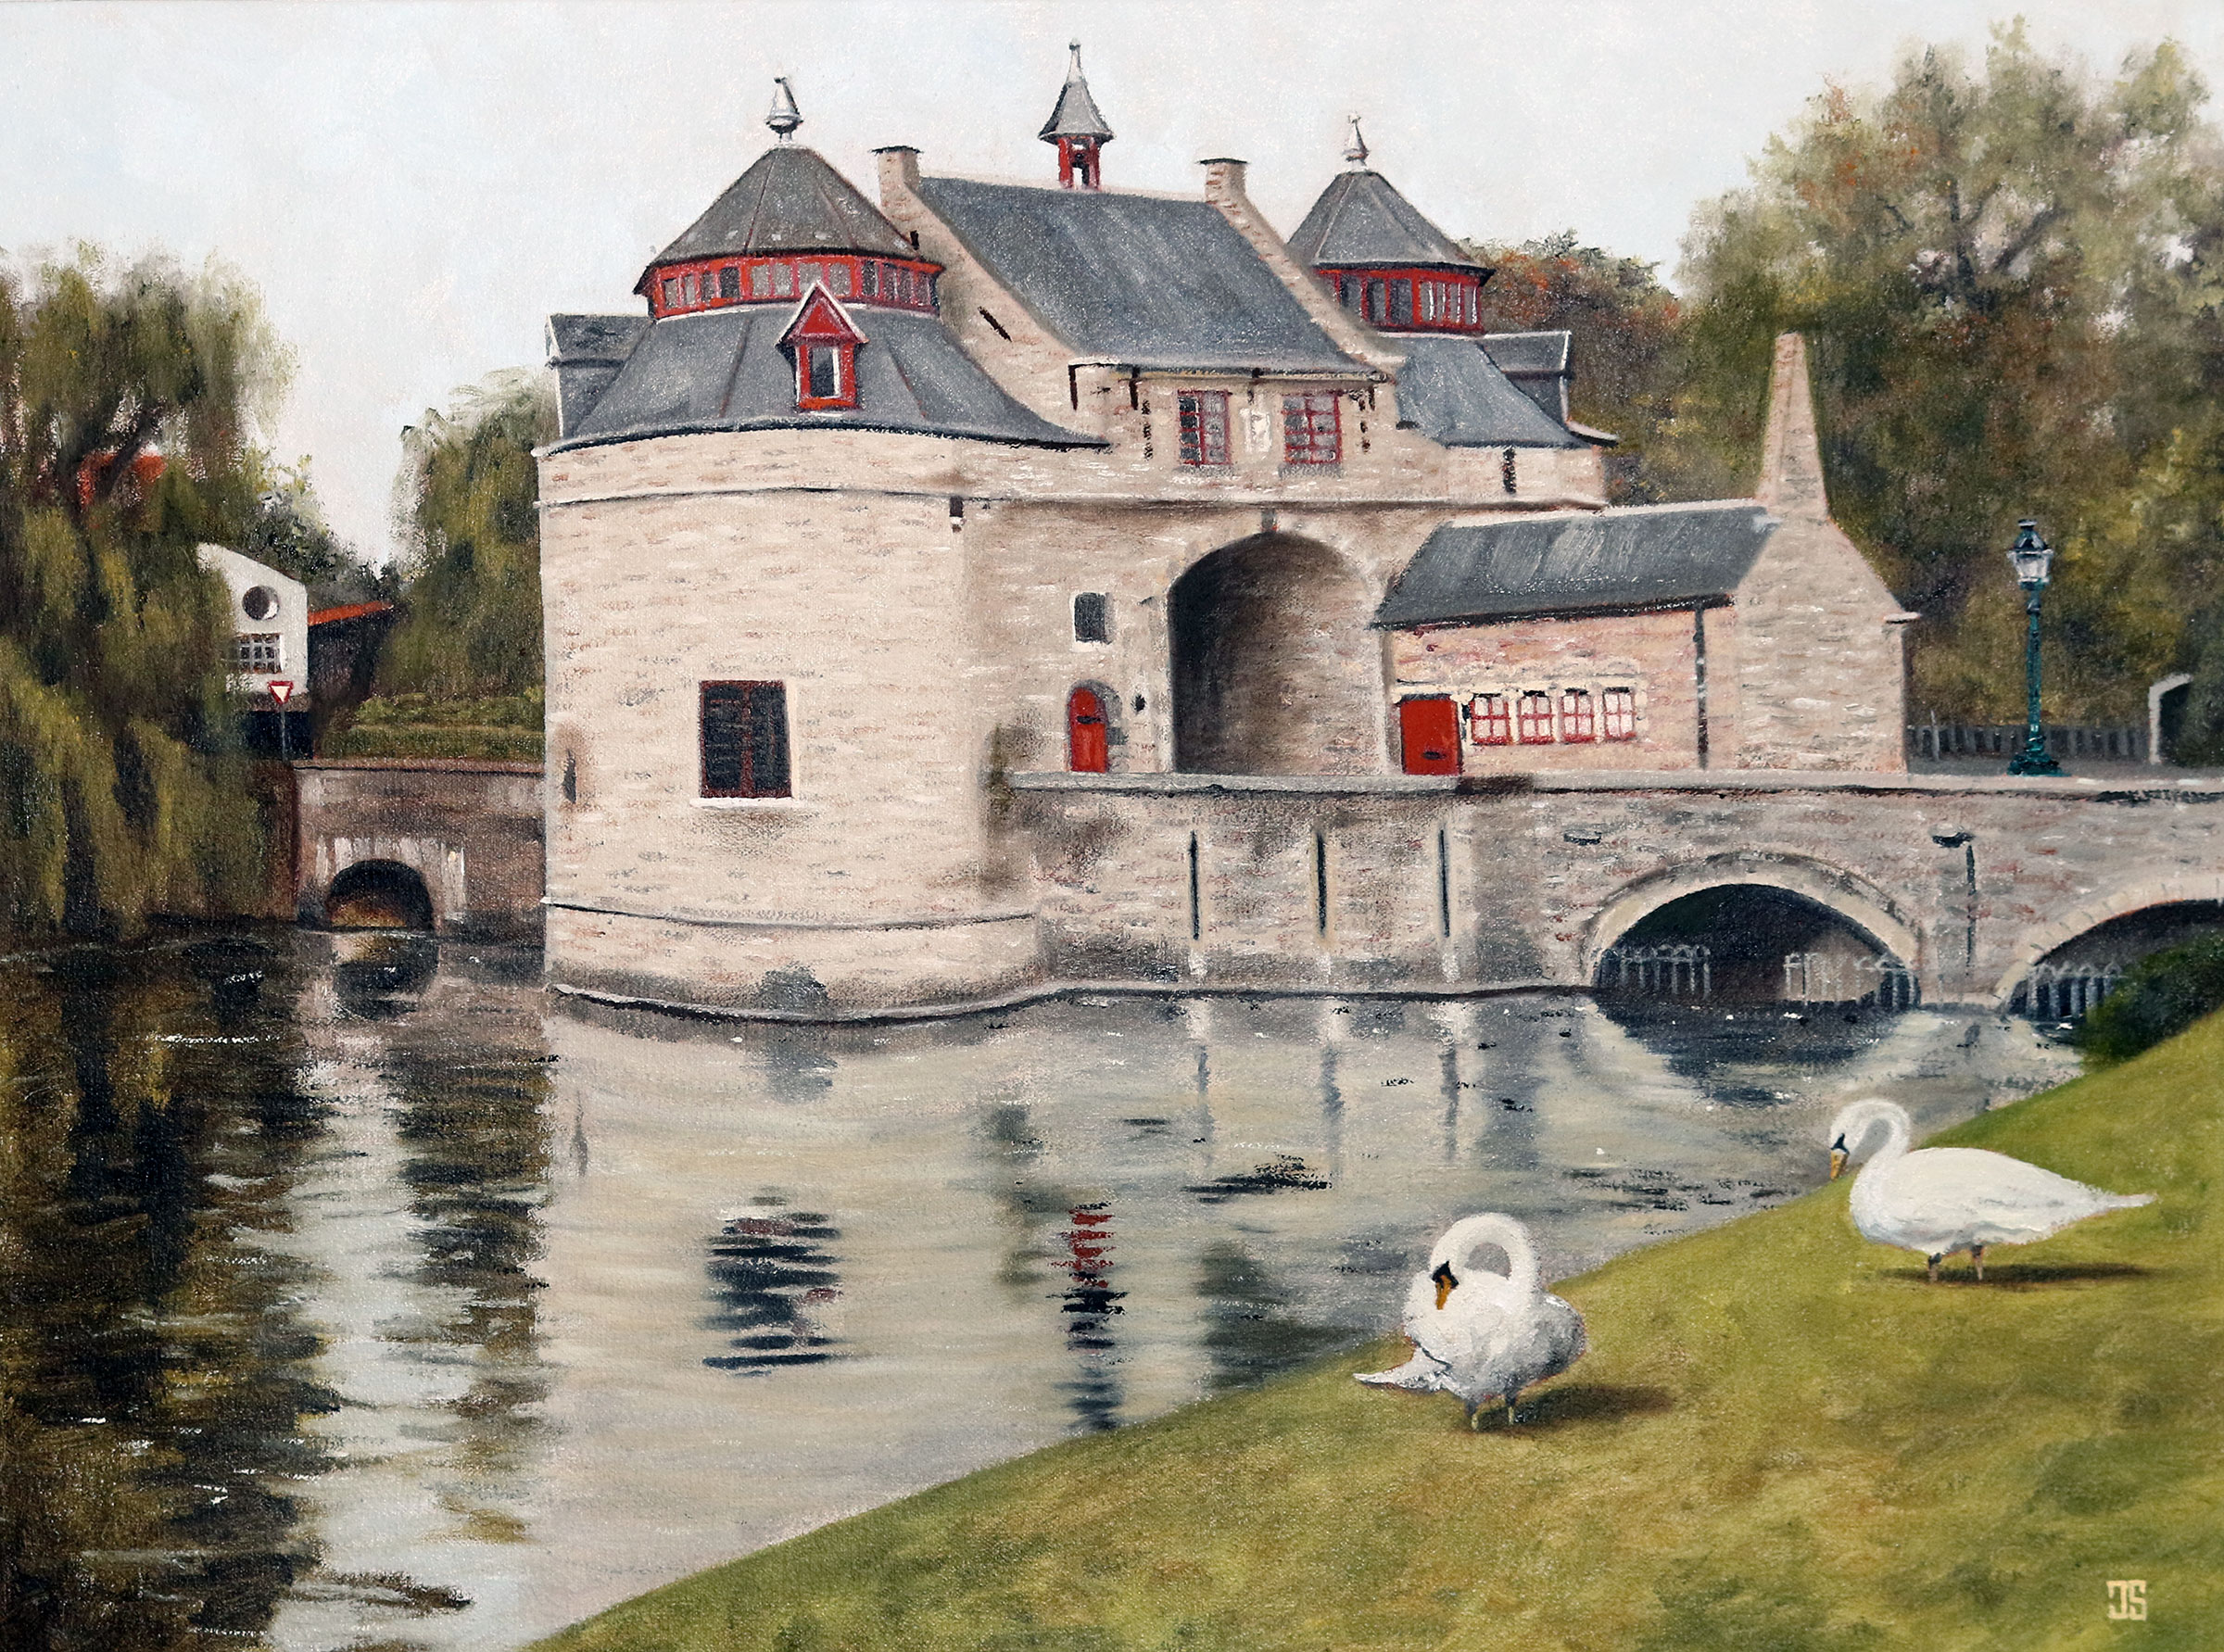 Oil painting "Blacksmith's Gate, Bruges" by Jeffrey Dale Starr